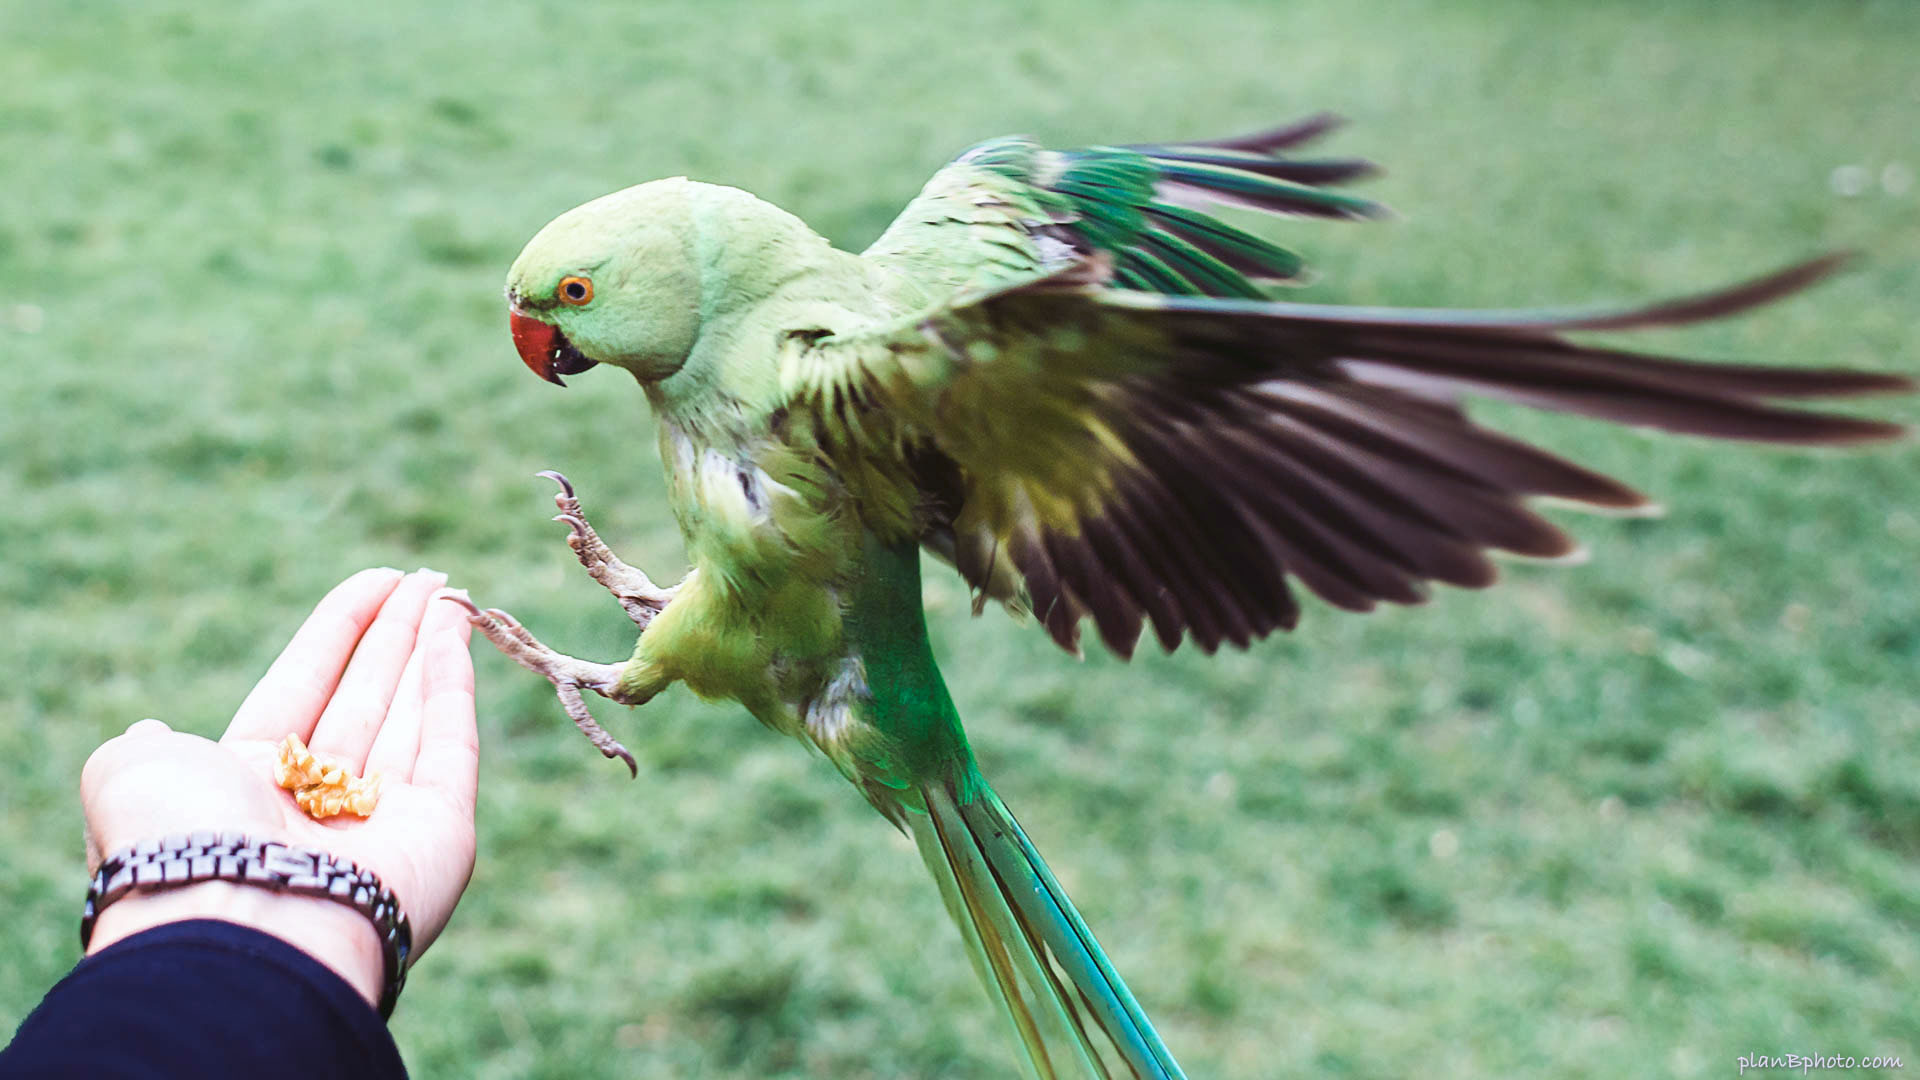 Green parrots in London: best location to see & photograph parakeets